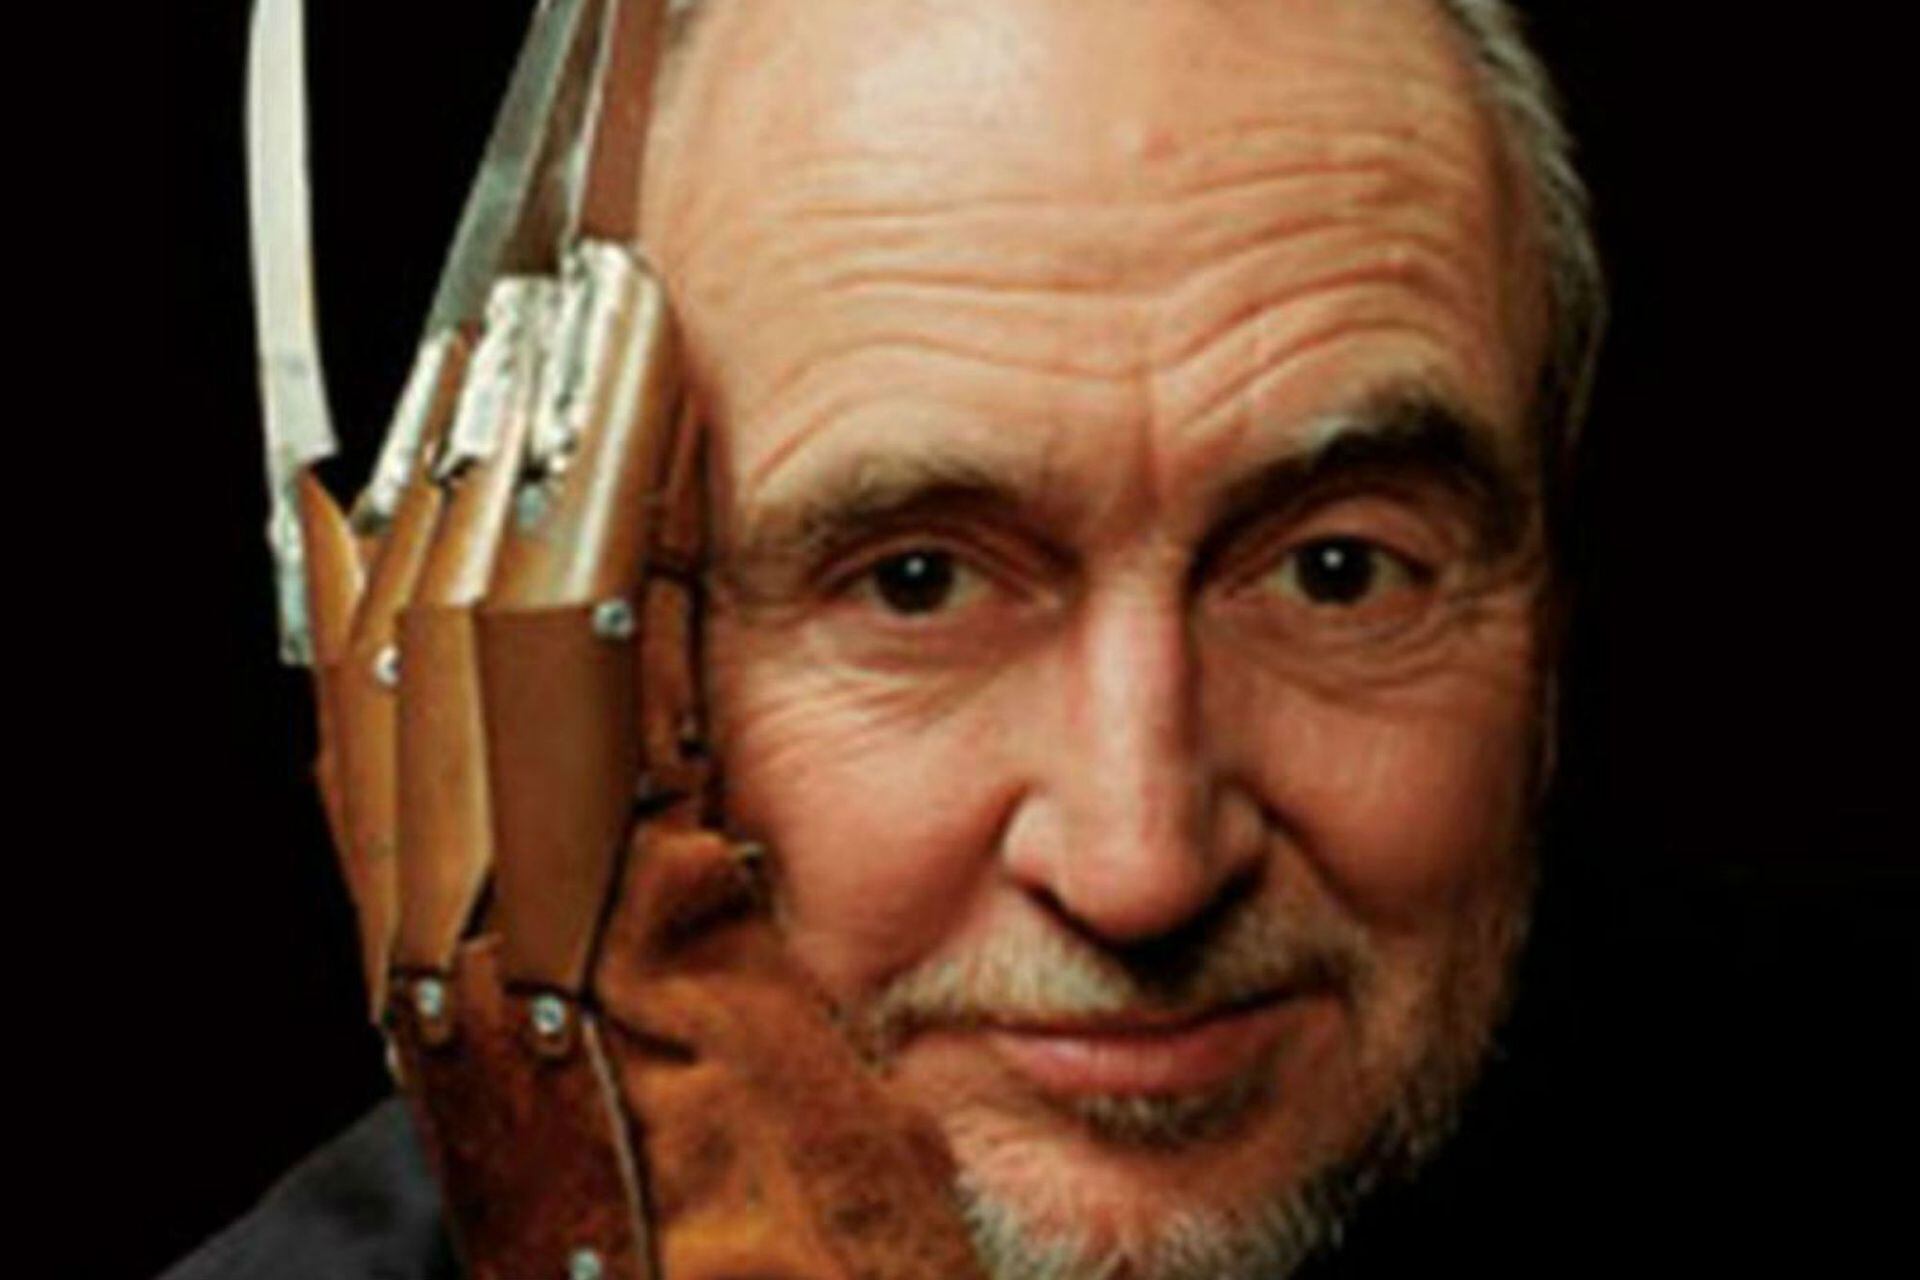 Wes Craven, creator of Freddy Krueger, among many other icons of the genre